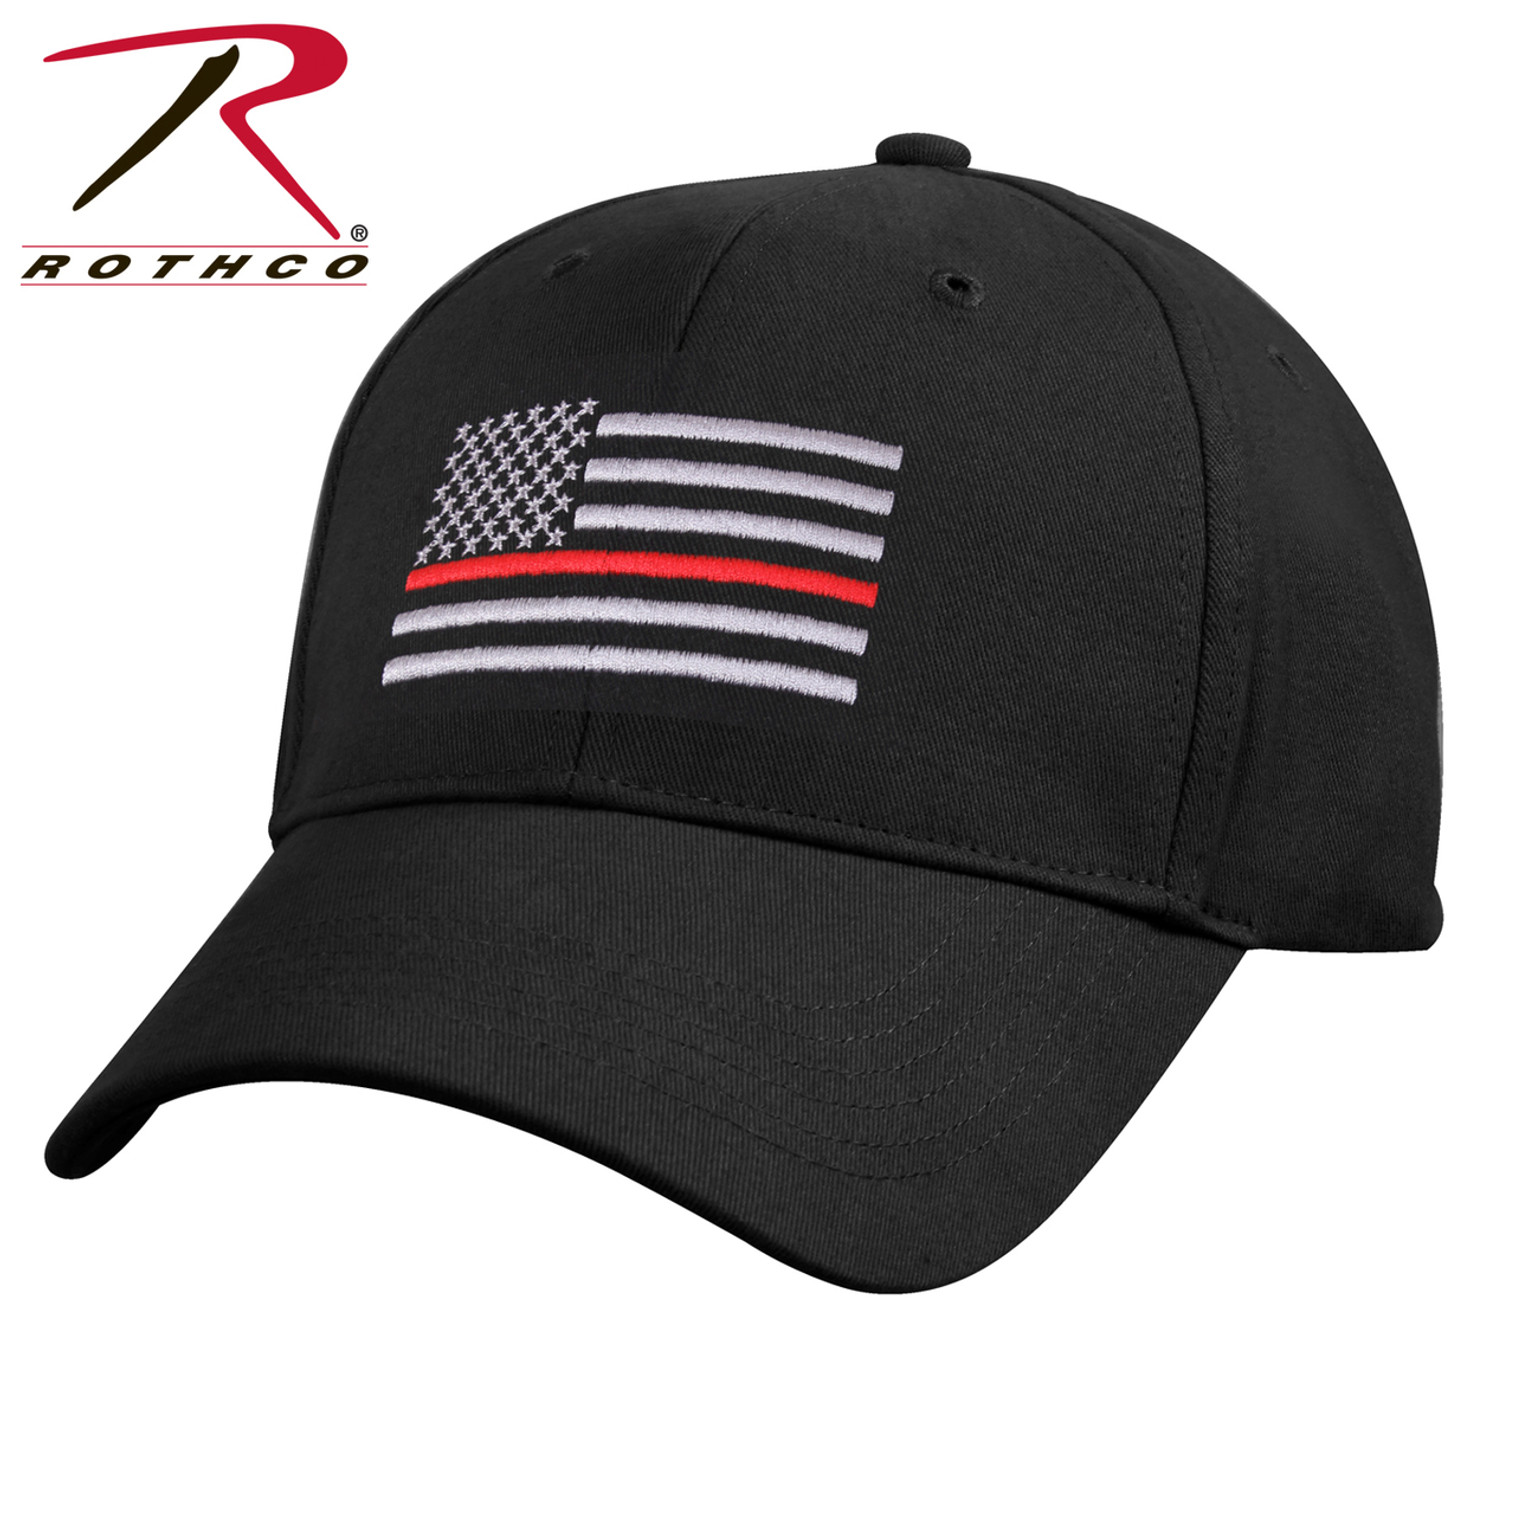 Rothco Thin Red Line Flag Low Profile Cap - Black